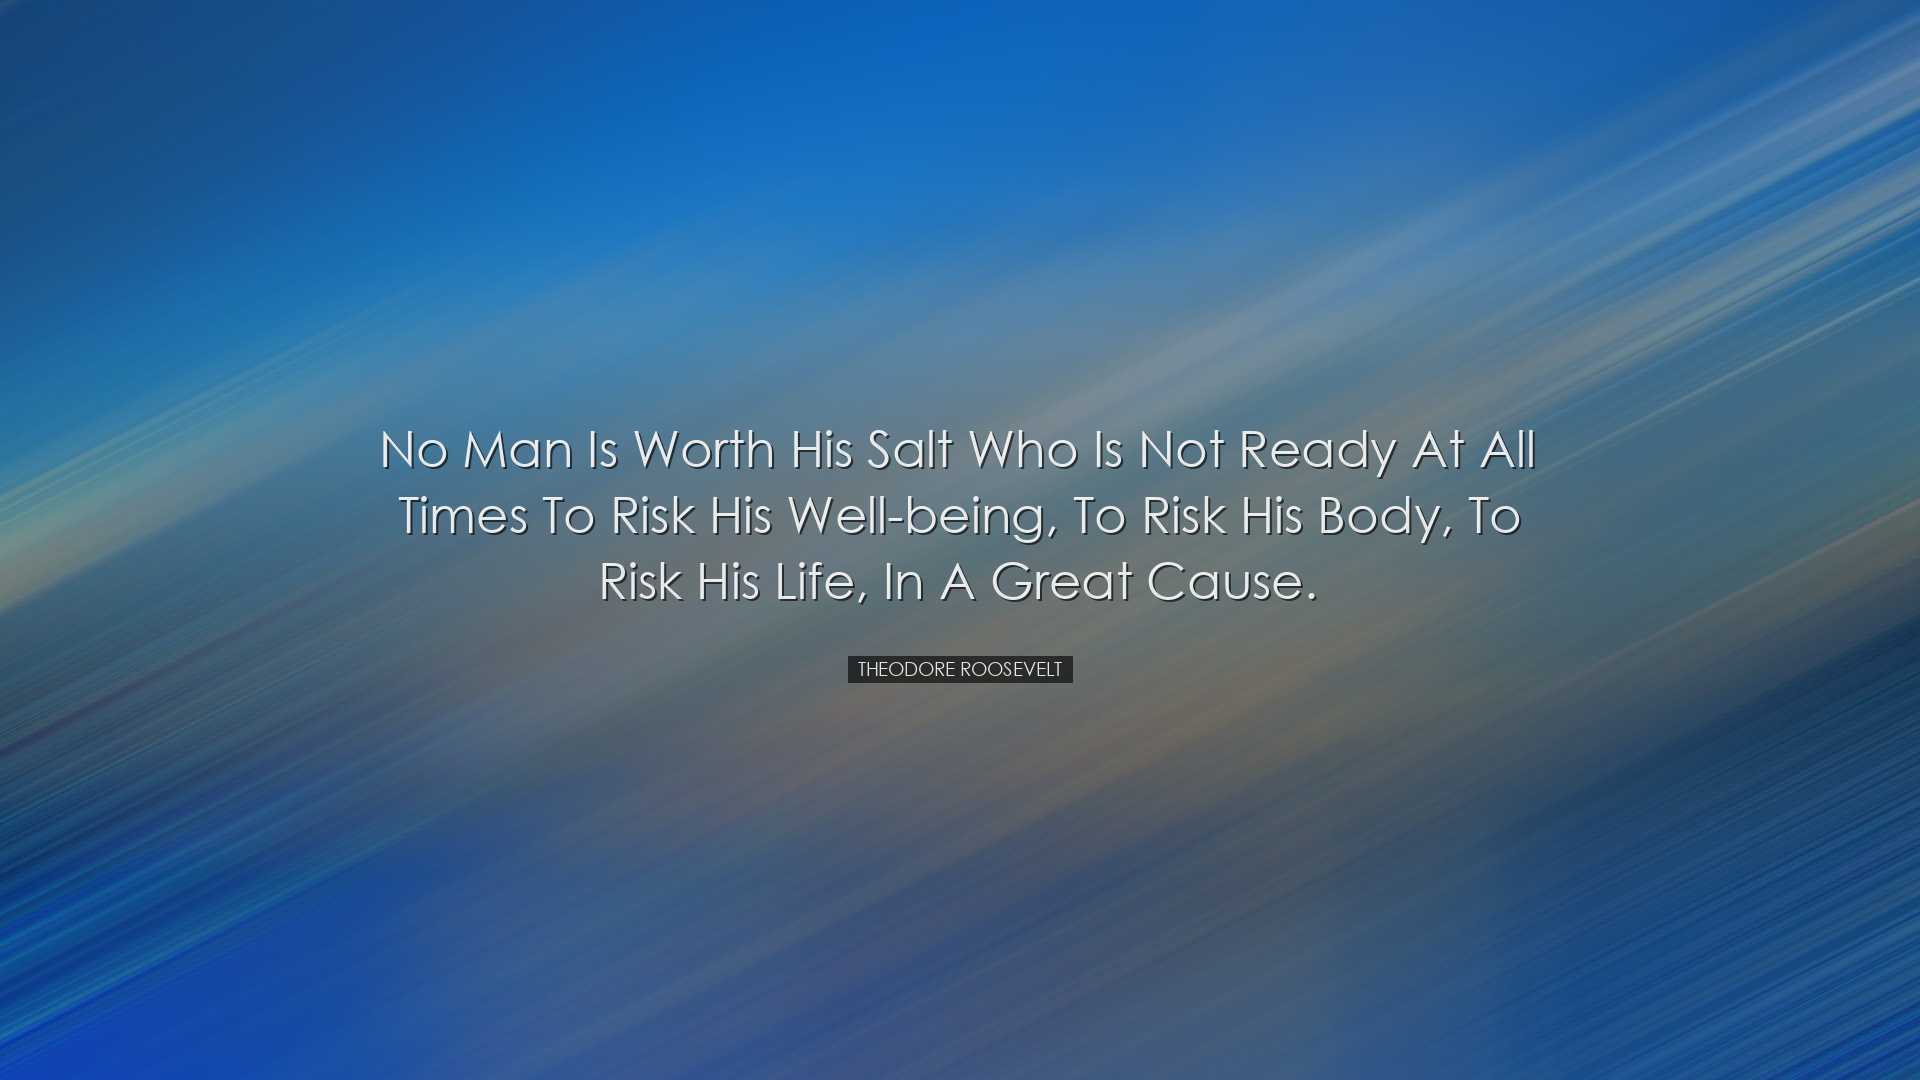 No man is worth his salt who is not ready at all times to risk his